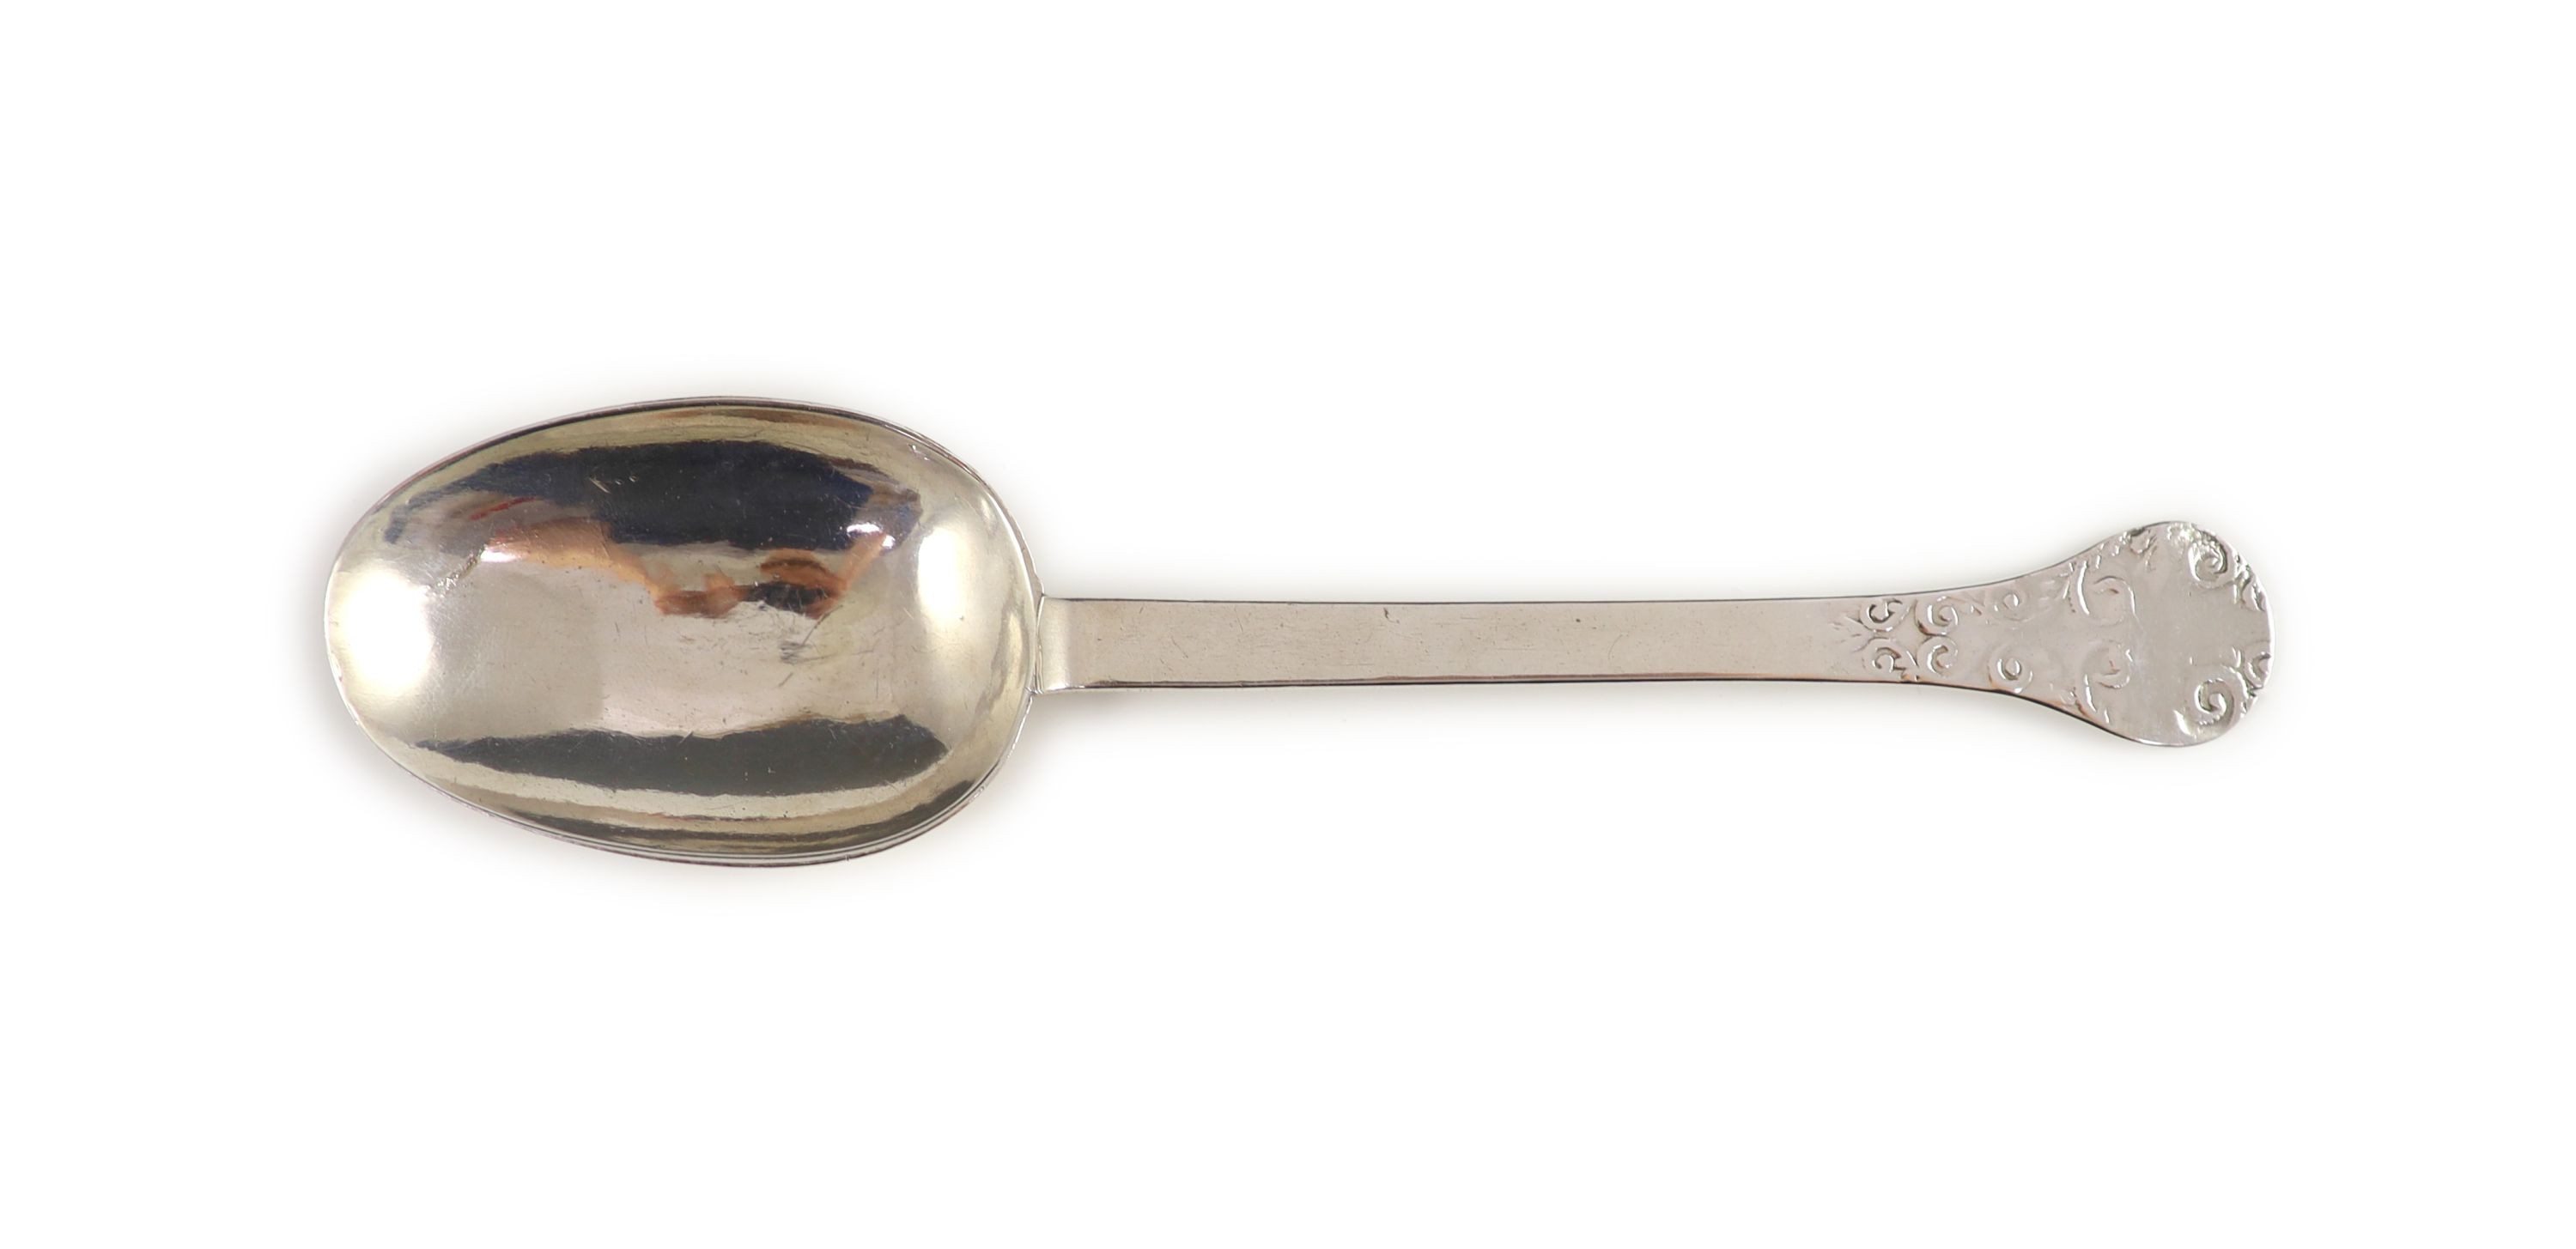 A William & Mary silver trefid spoon, London, 1689, attributed to Lawrence Coles, 19.5cm long, 1.8 oz.